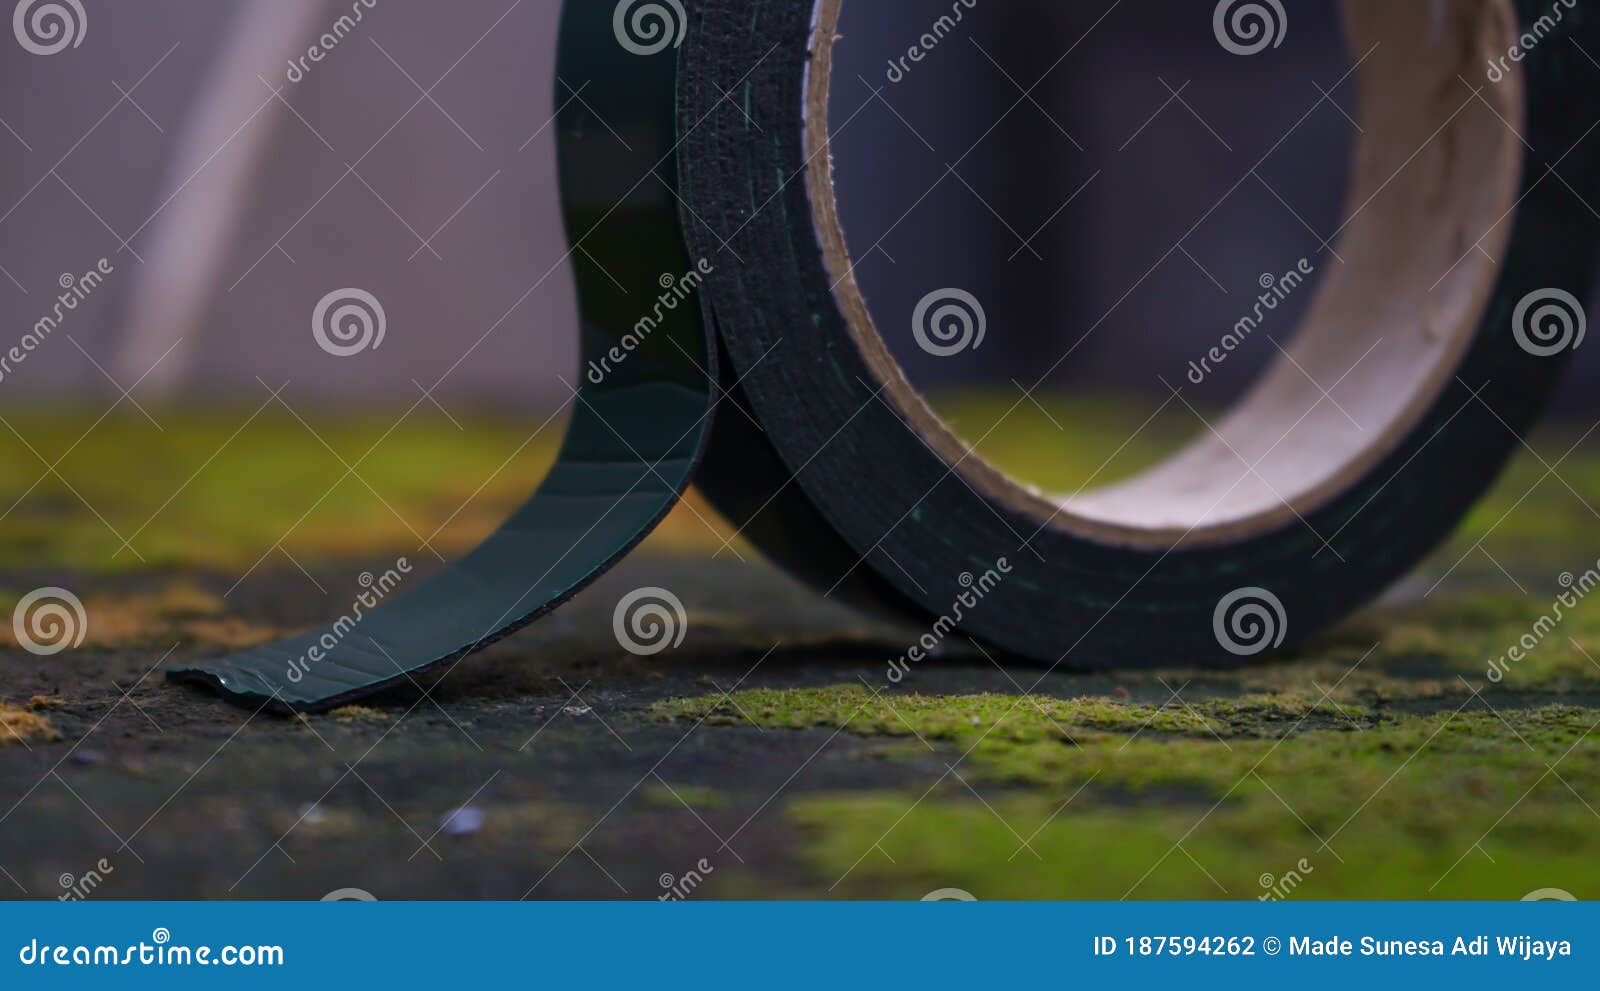 Close Up The Doublesided Tape On The Mossy Cement Floor Stock Photo Image of bandage, double